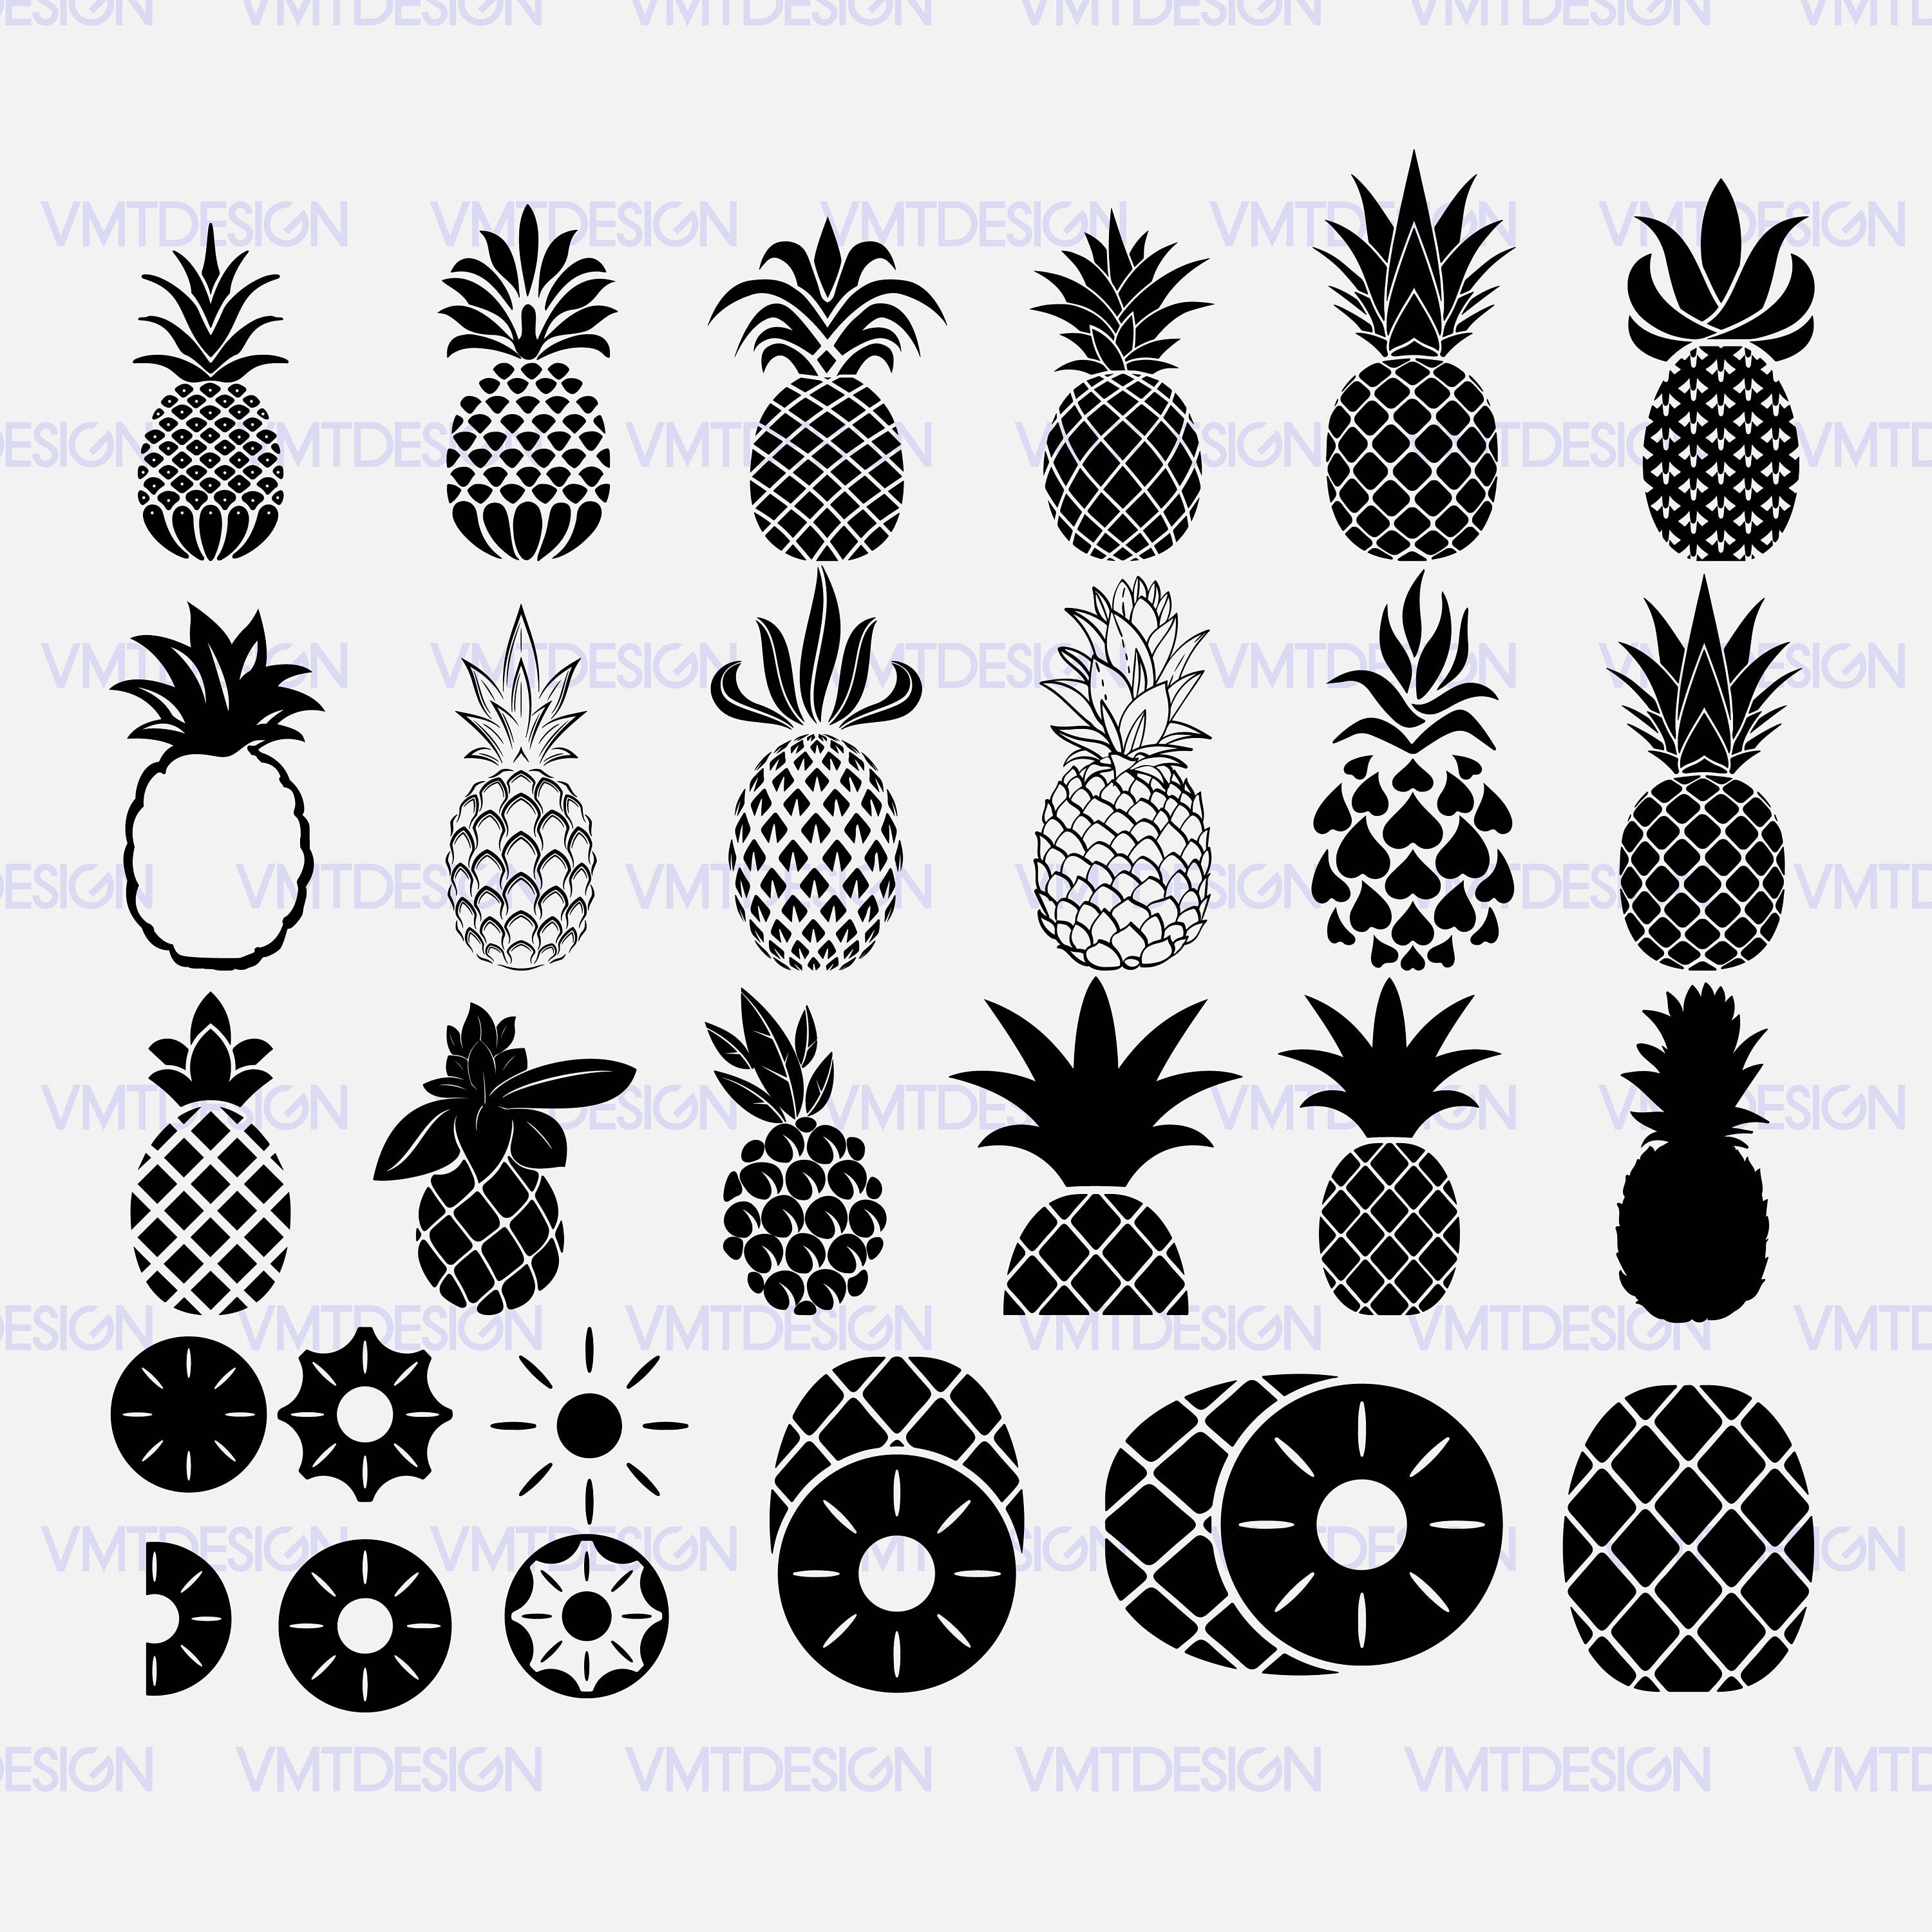 Download Pineapple SVG - Pineapple Silhouette SVG - Pineapple ...